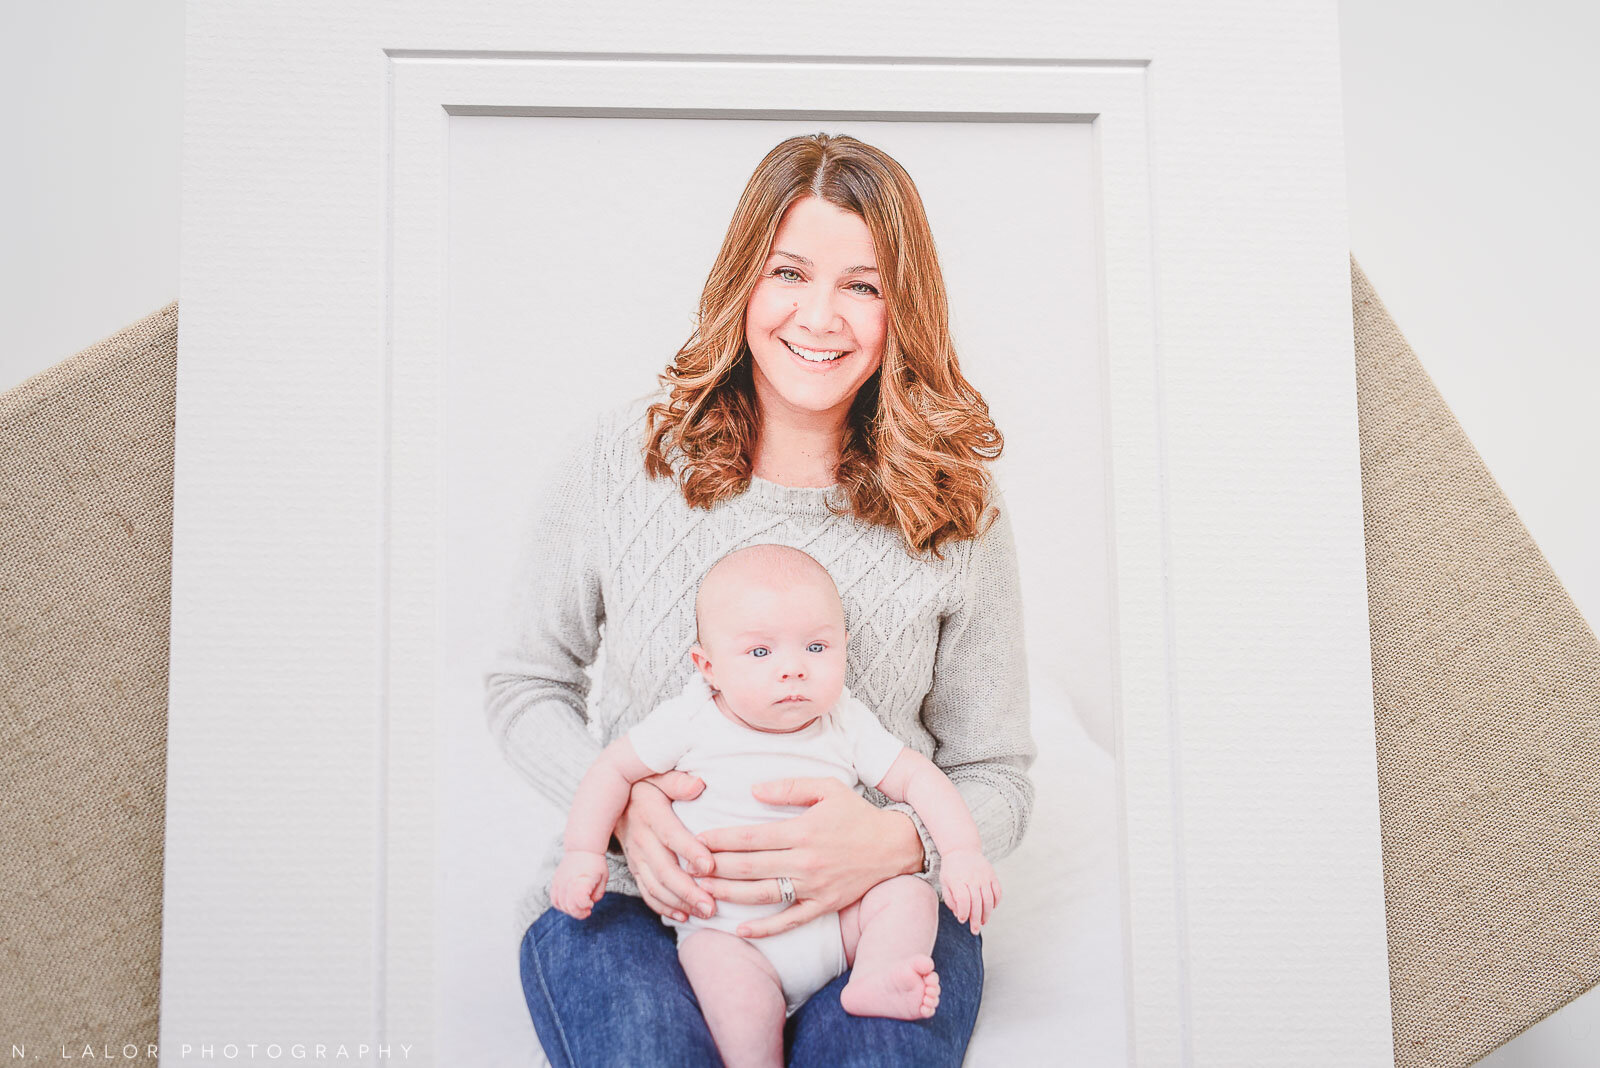 nlalor-photography-2018-twins-baby-photo-session-greenwich-connecticut-13.jpg